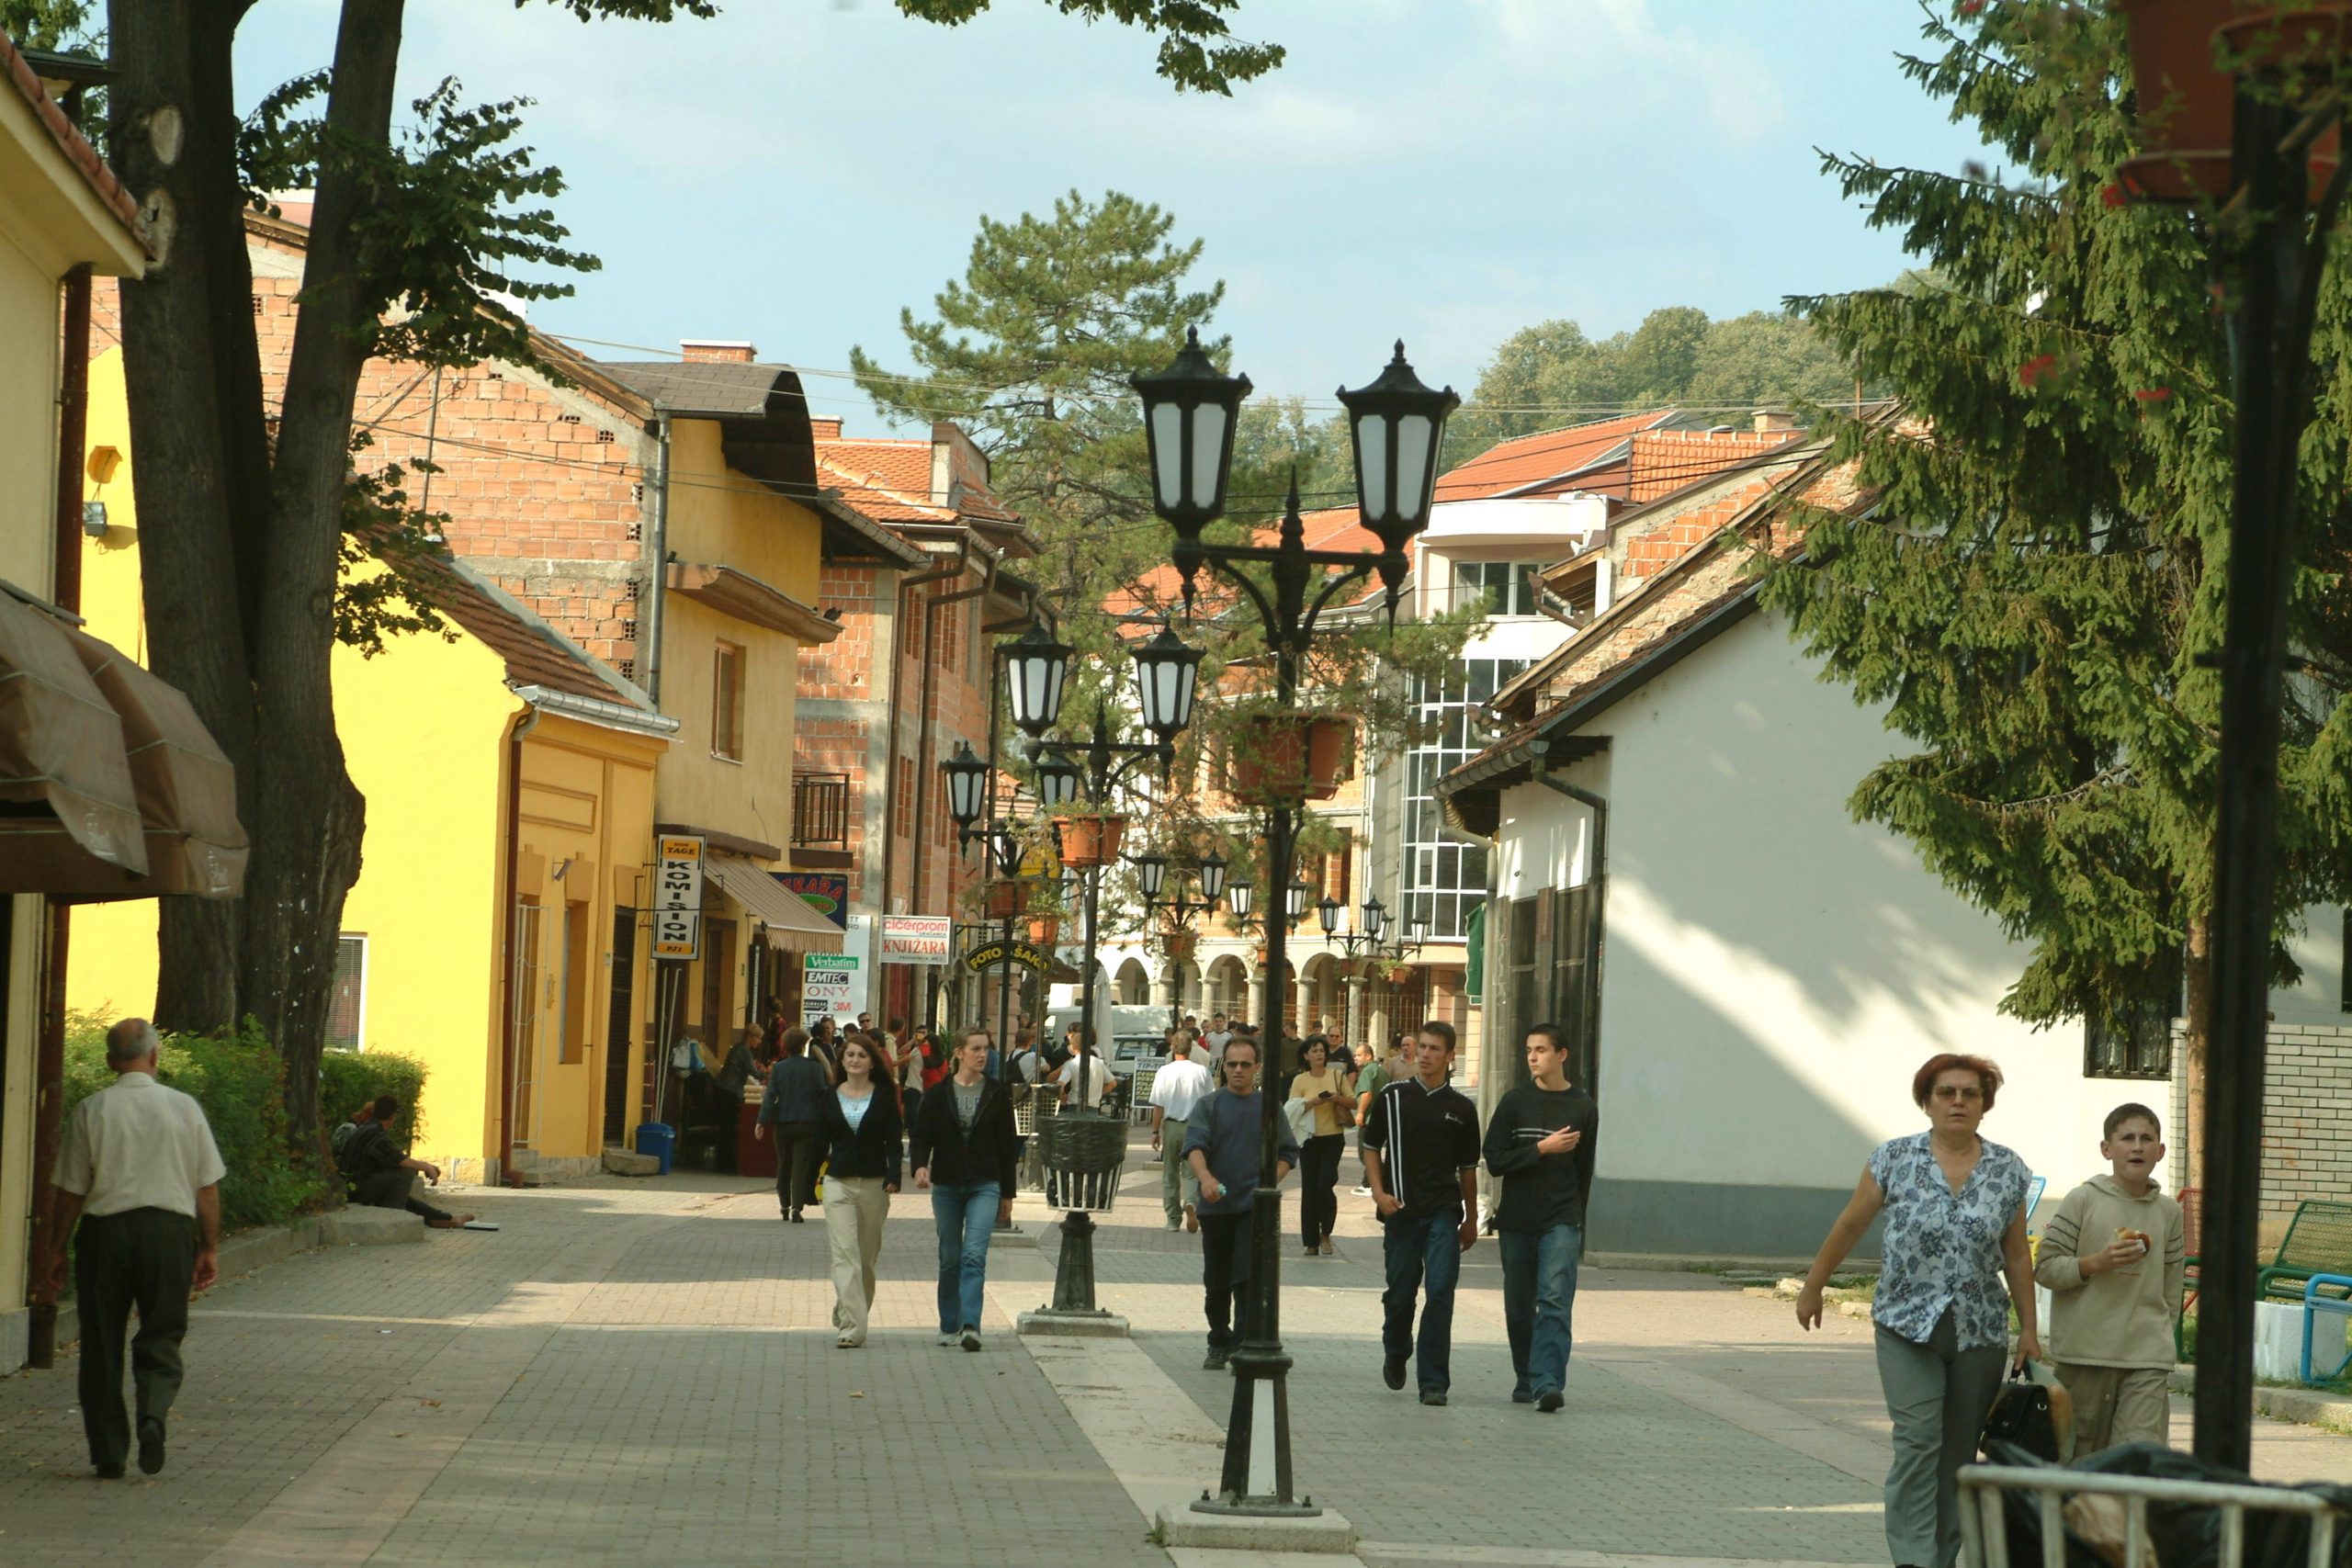  Gračanica – Small Town in the Valley of the Spreča River